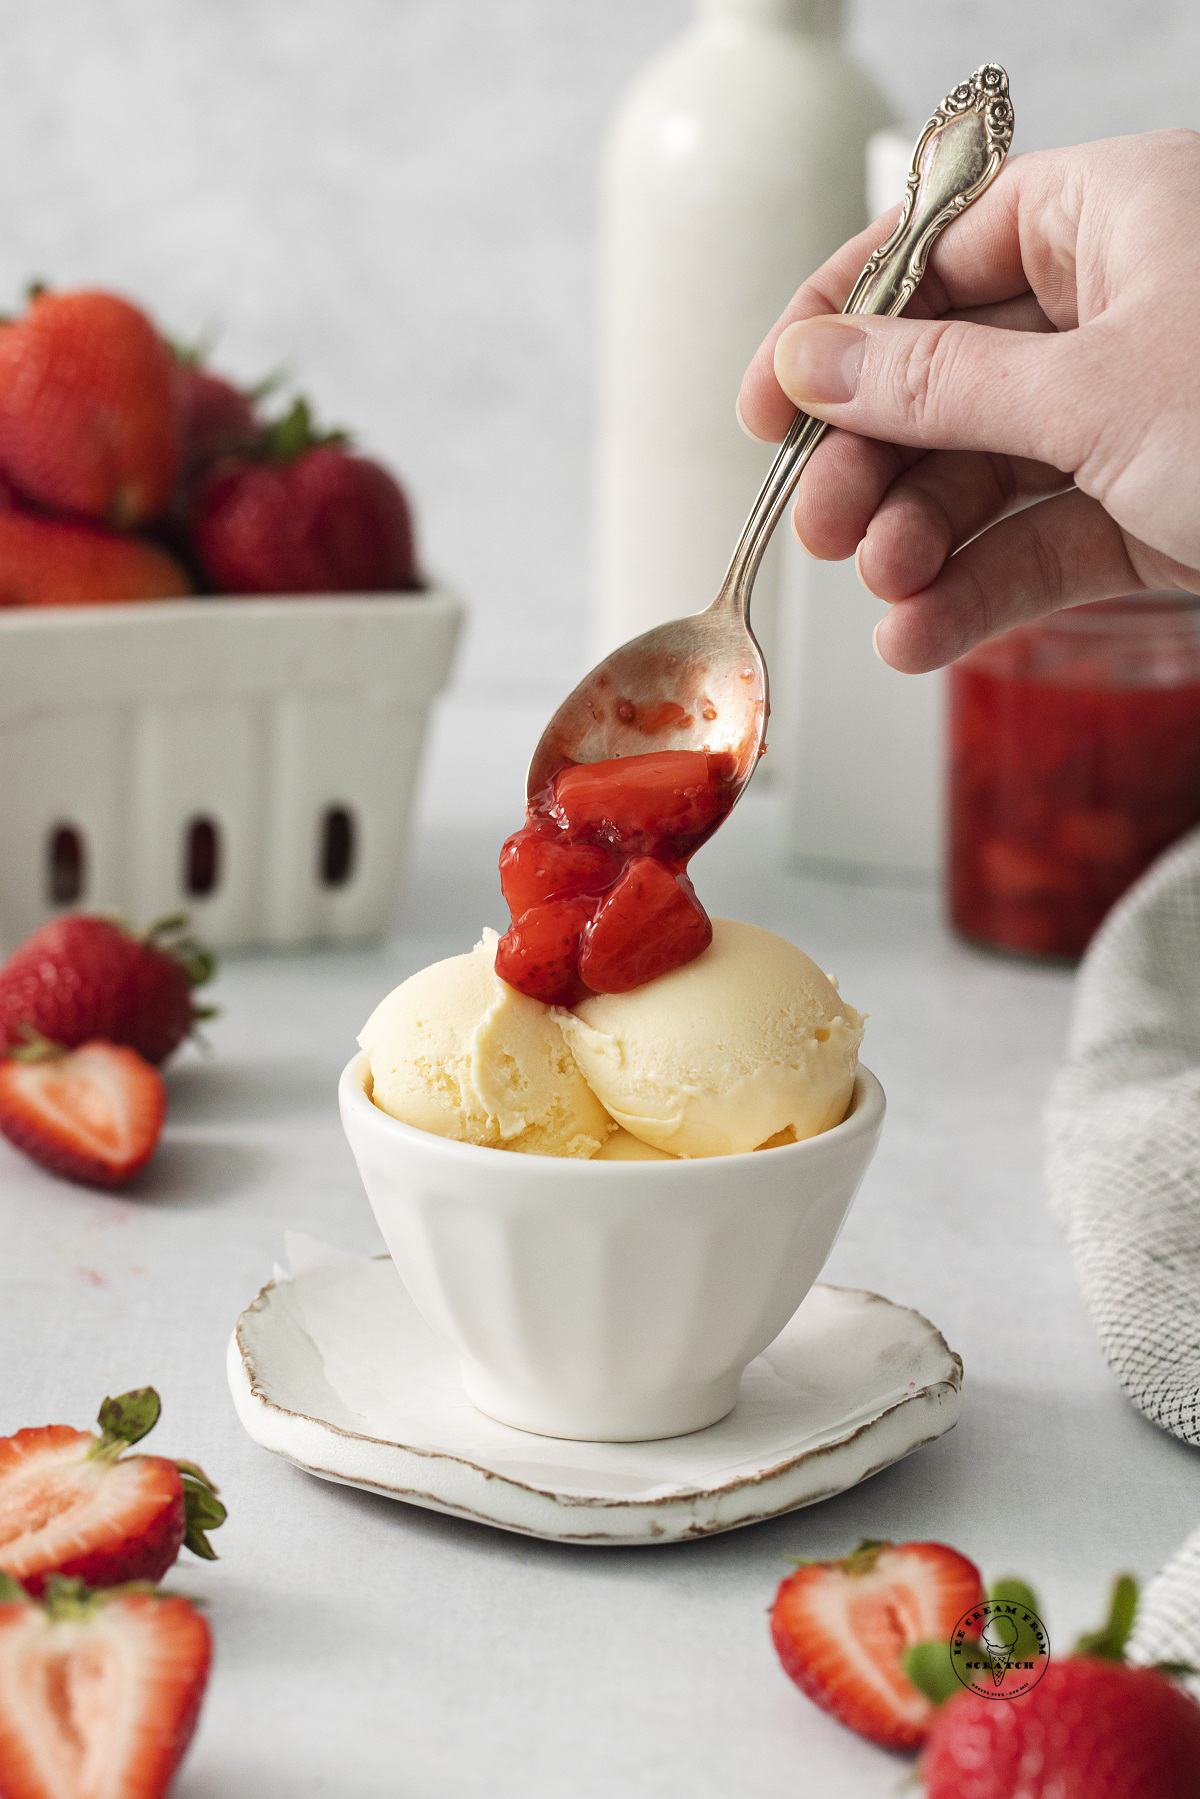 a scoop of strawberry compote by hand over scoops of vanilla ice cream.